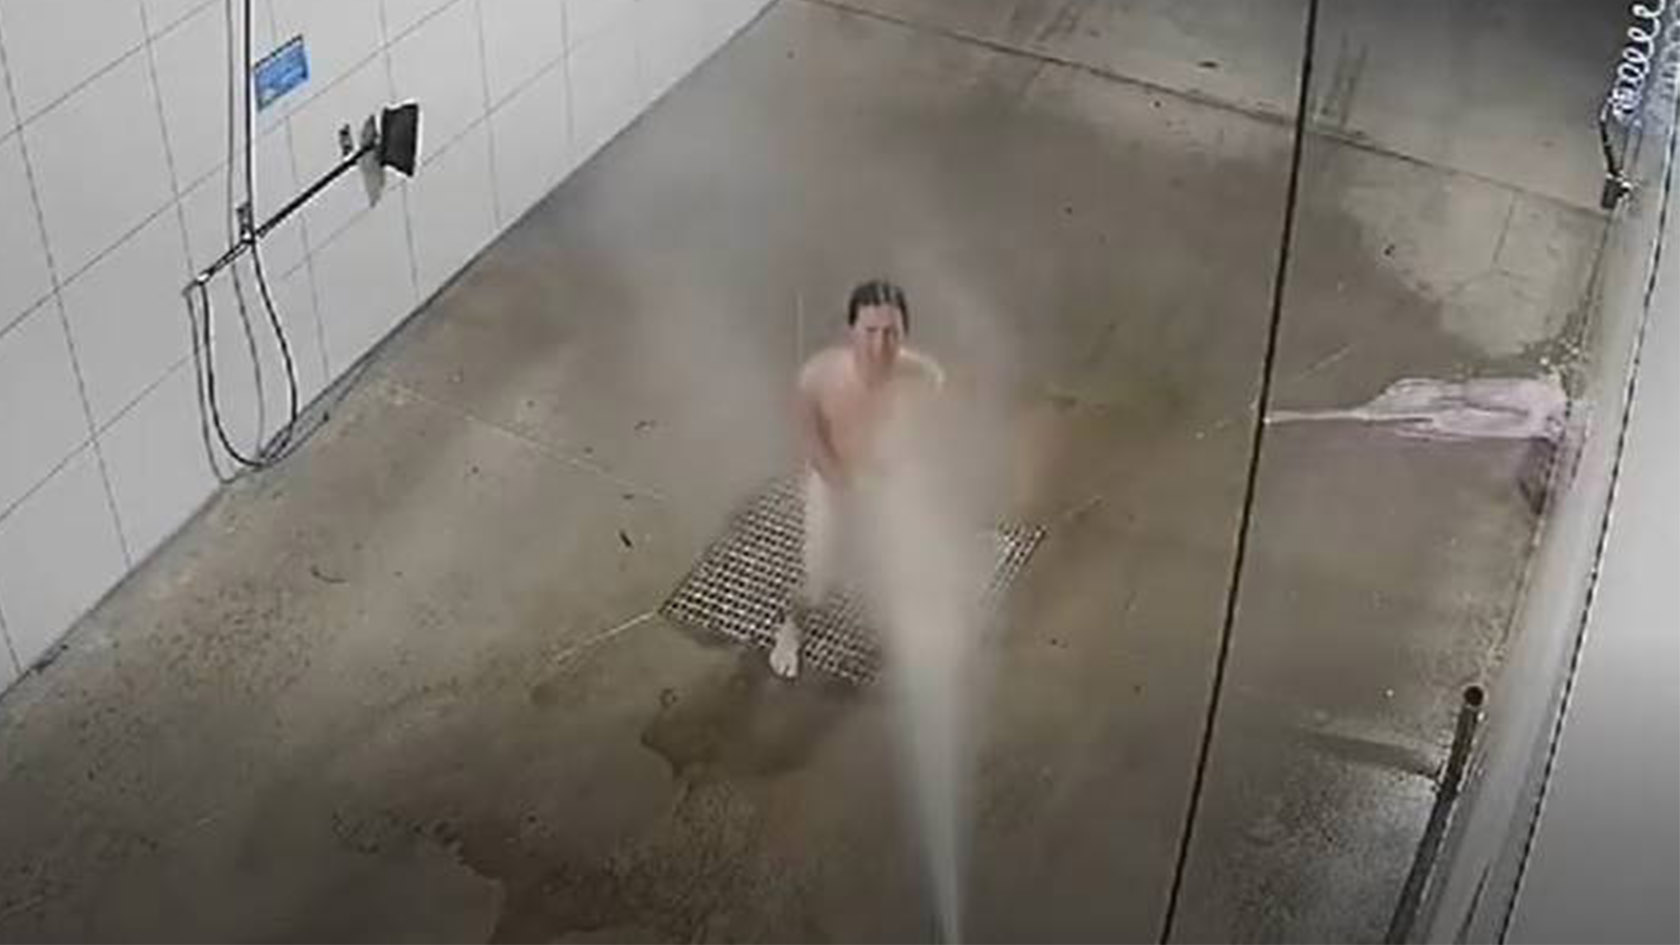 Sometimes used cars are purchased from individuals rather than dealerships, which can require more of the buyer’s participation in the process of transferring the ti. Watch: Queensland Man Caught Taking A Shower At His Local